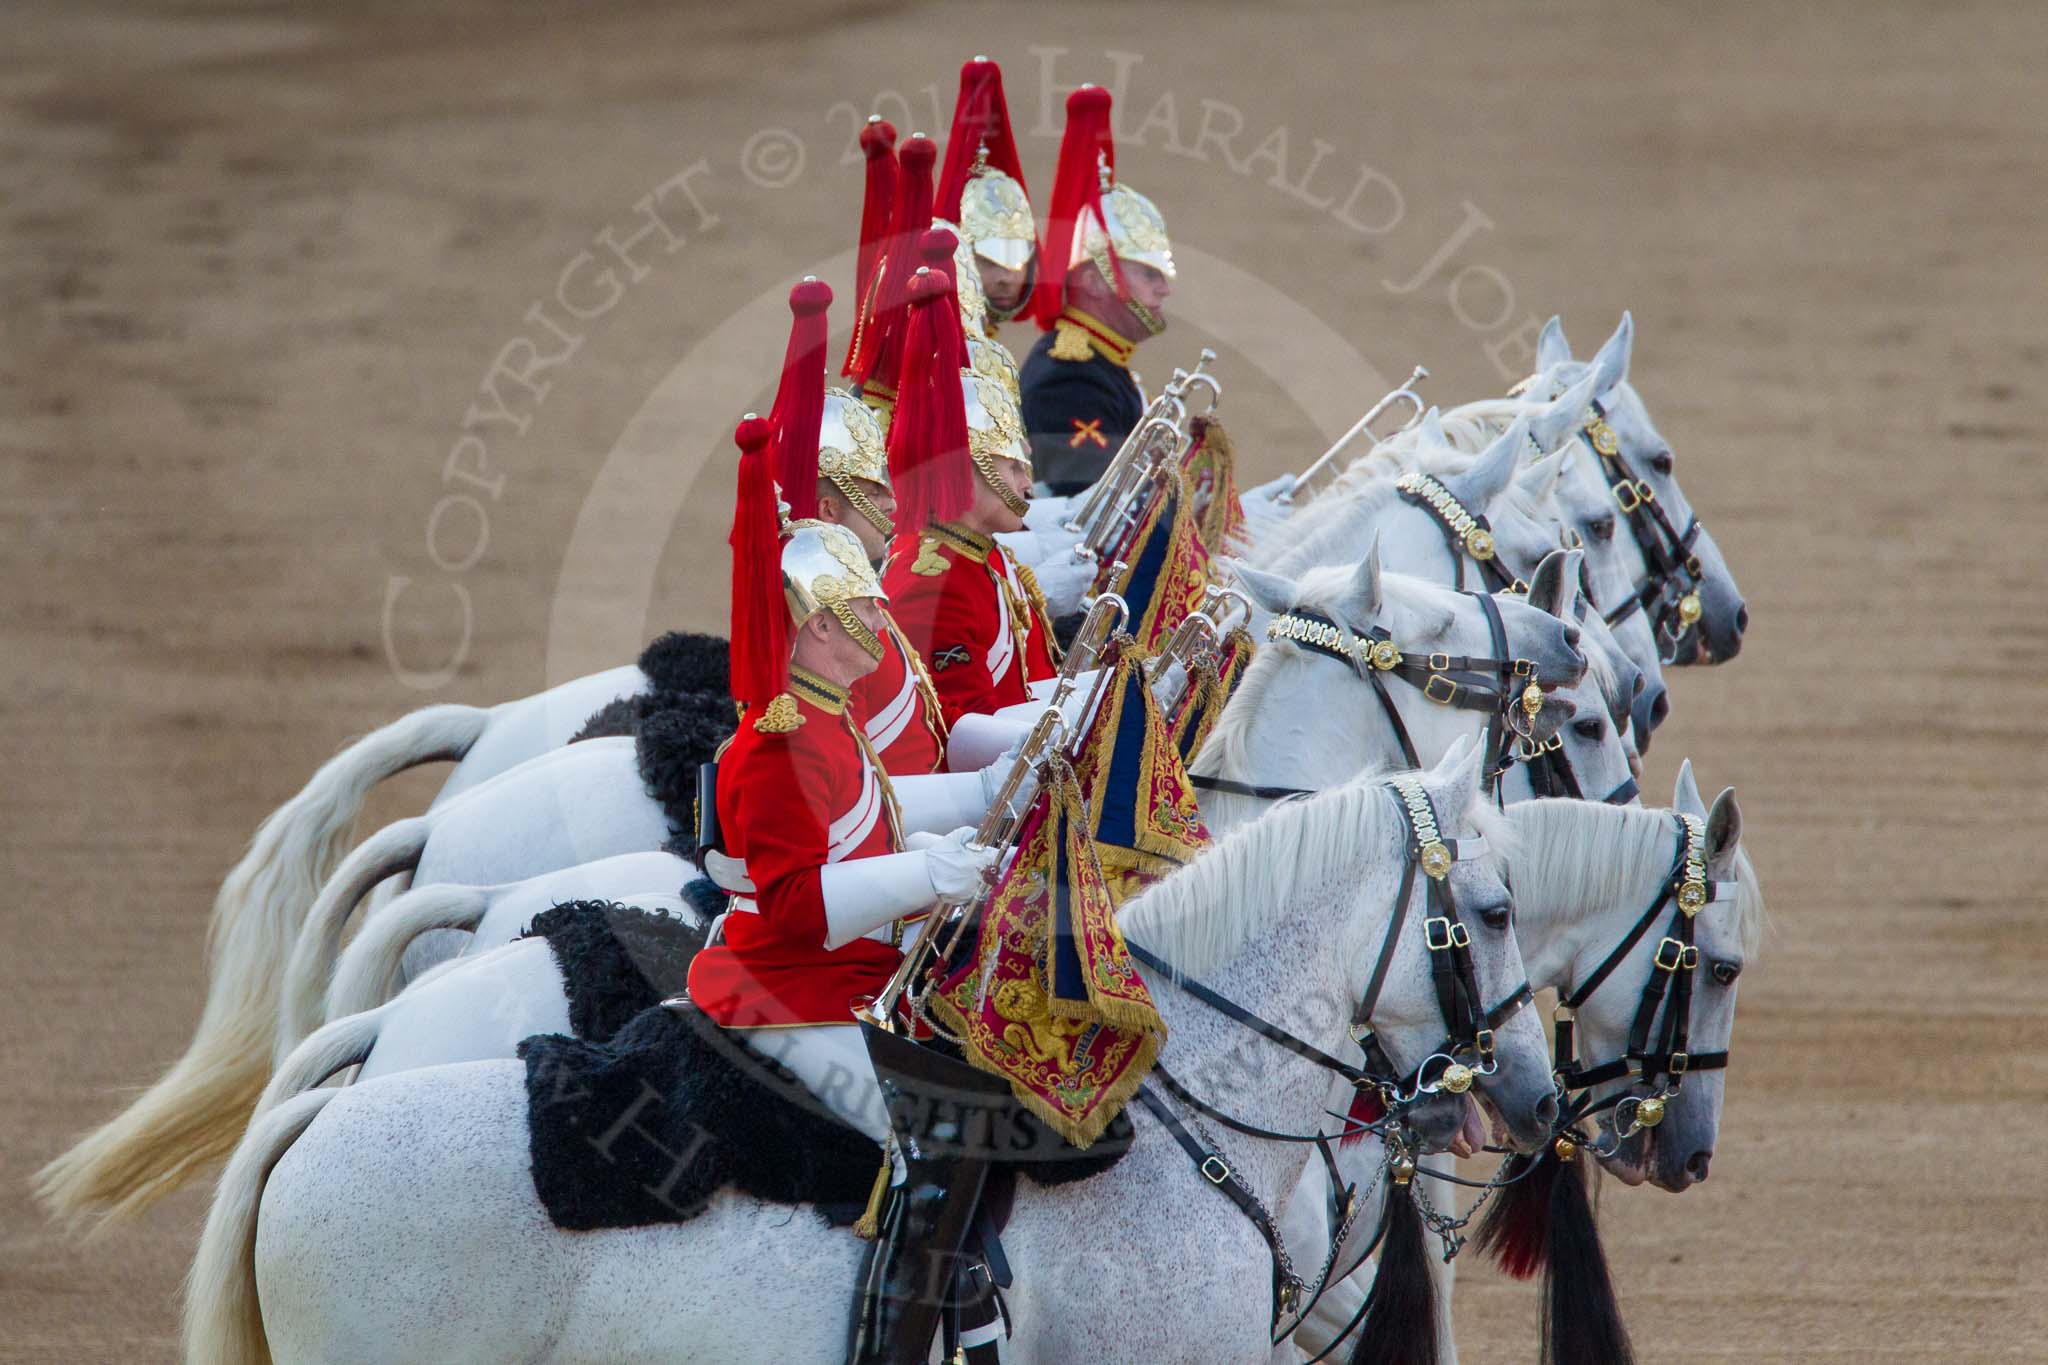 Beating Retreat 2014.
Horse Guards Parade, Westminster,
London SW1A,

United Kingdom,
on 11 June 2014 at 20:41, image #166